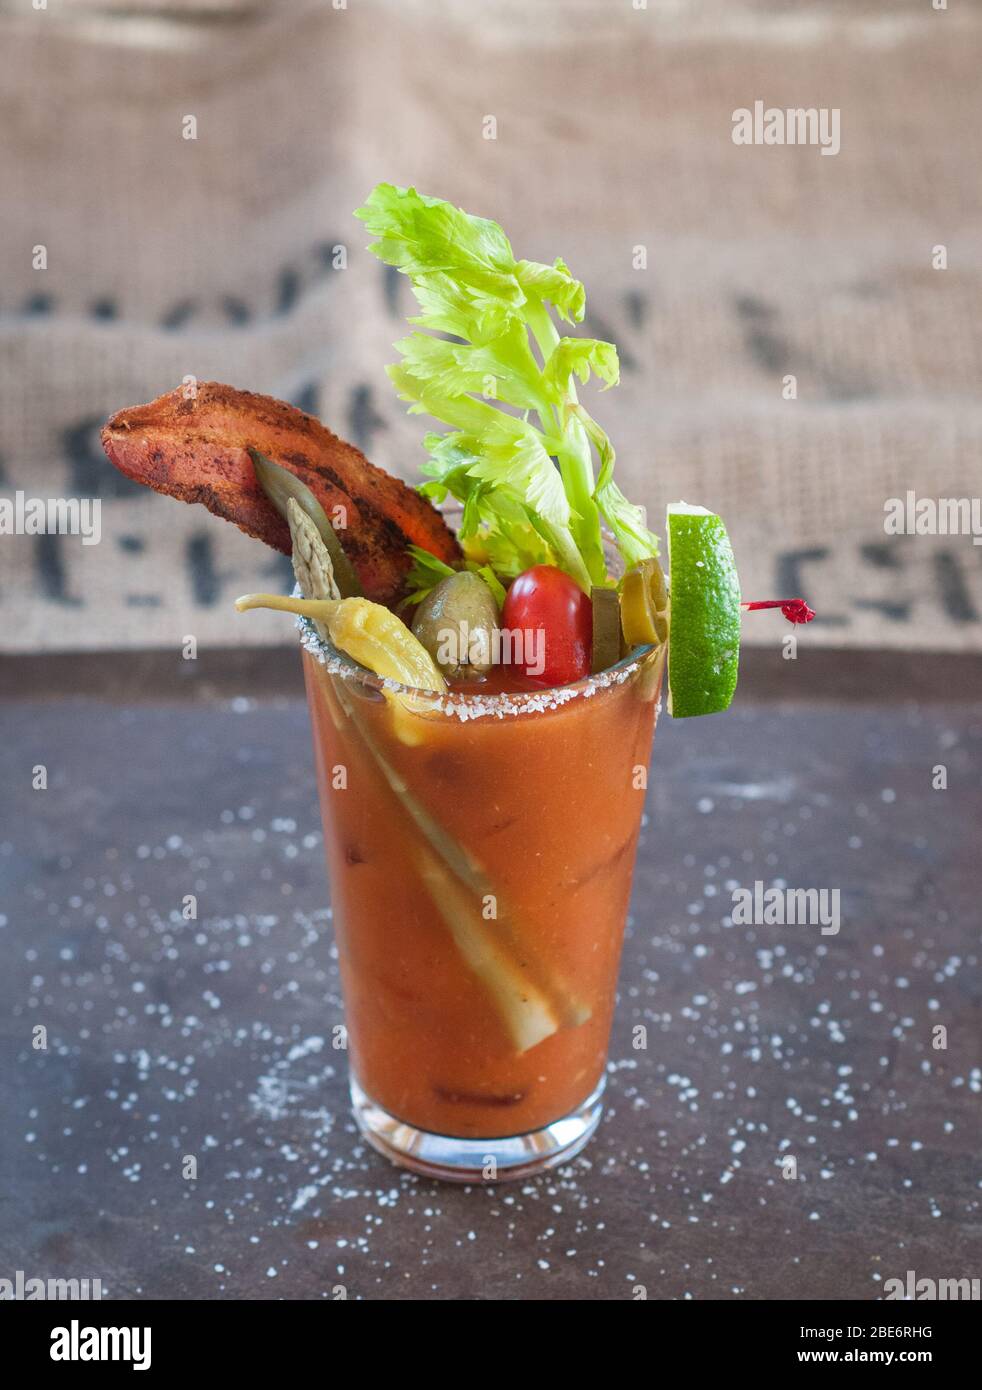 Single colorful Bloody Mary cocktail in a clear glass with a salted rim, bacon, celery, lime, asparagus garnishes. Stock Photo